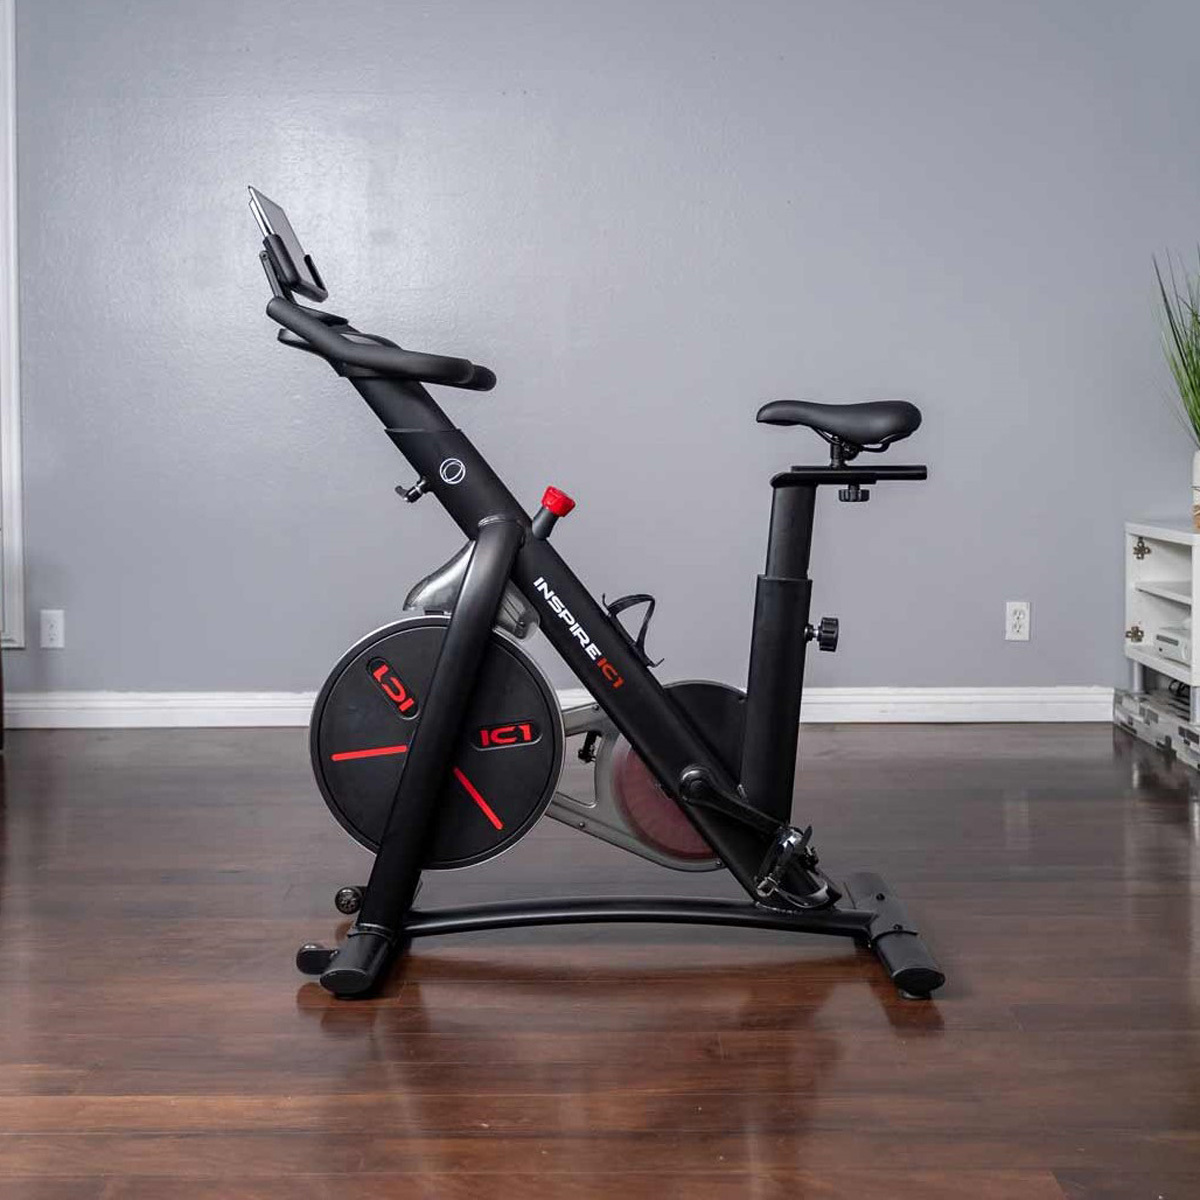 image of bike in a room